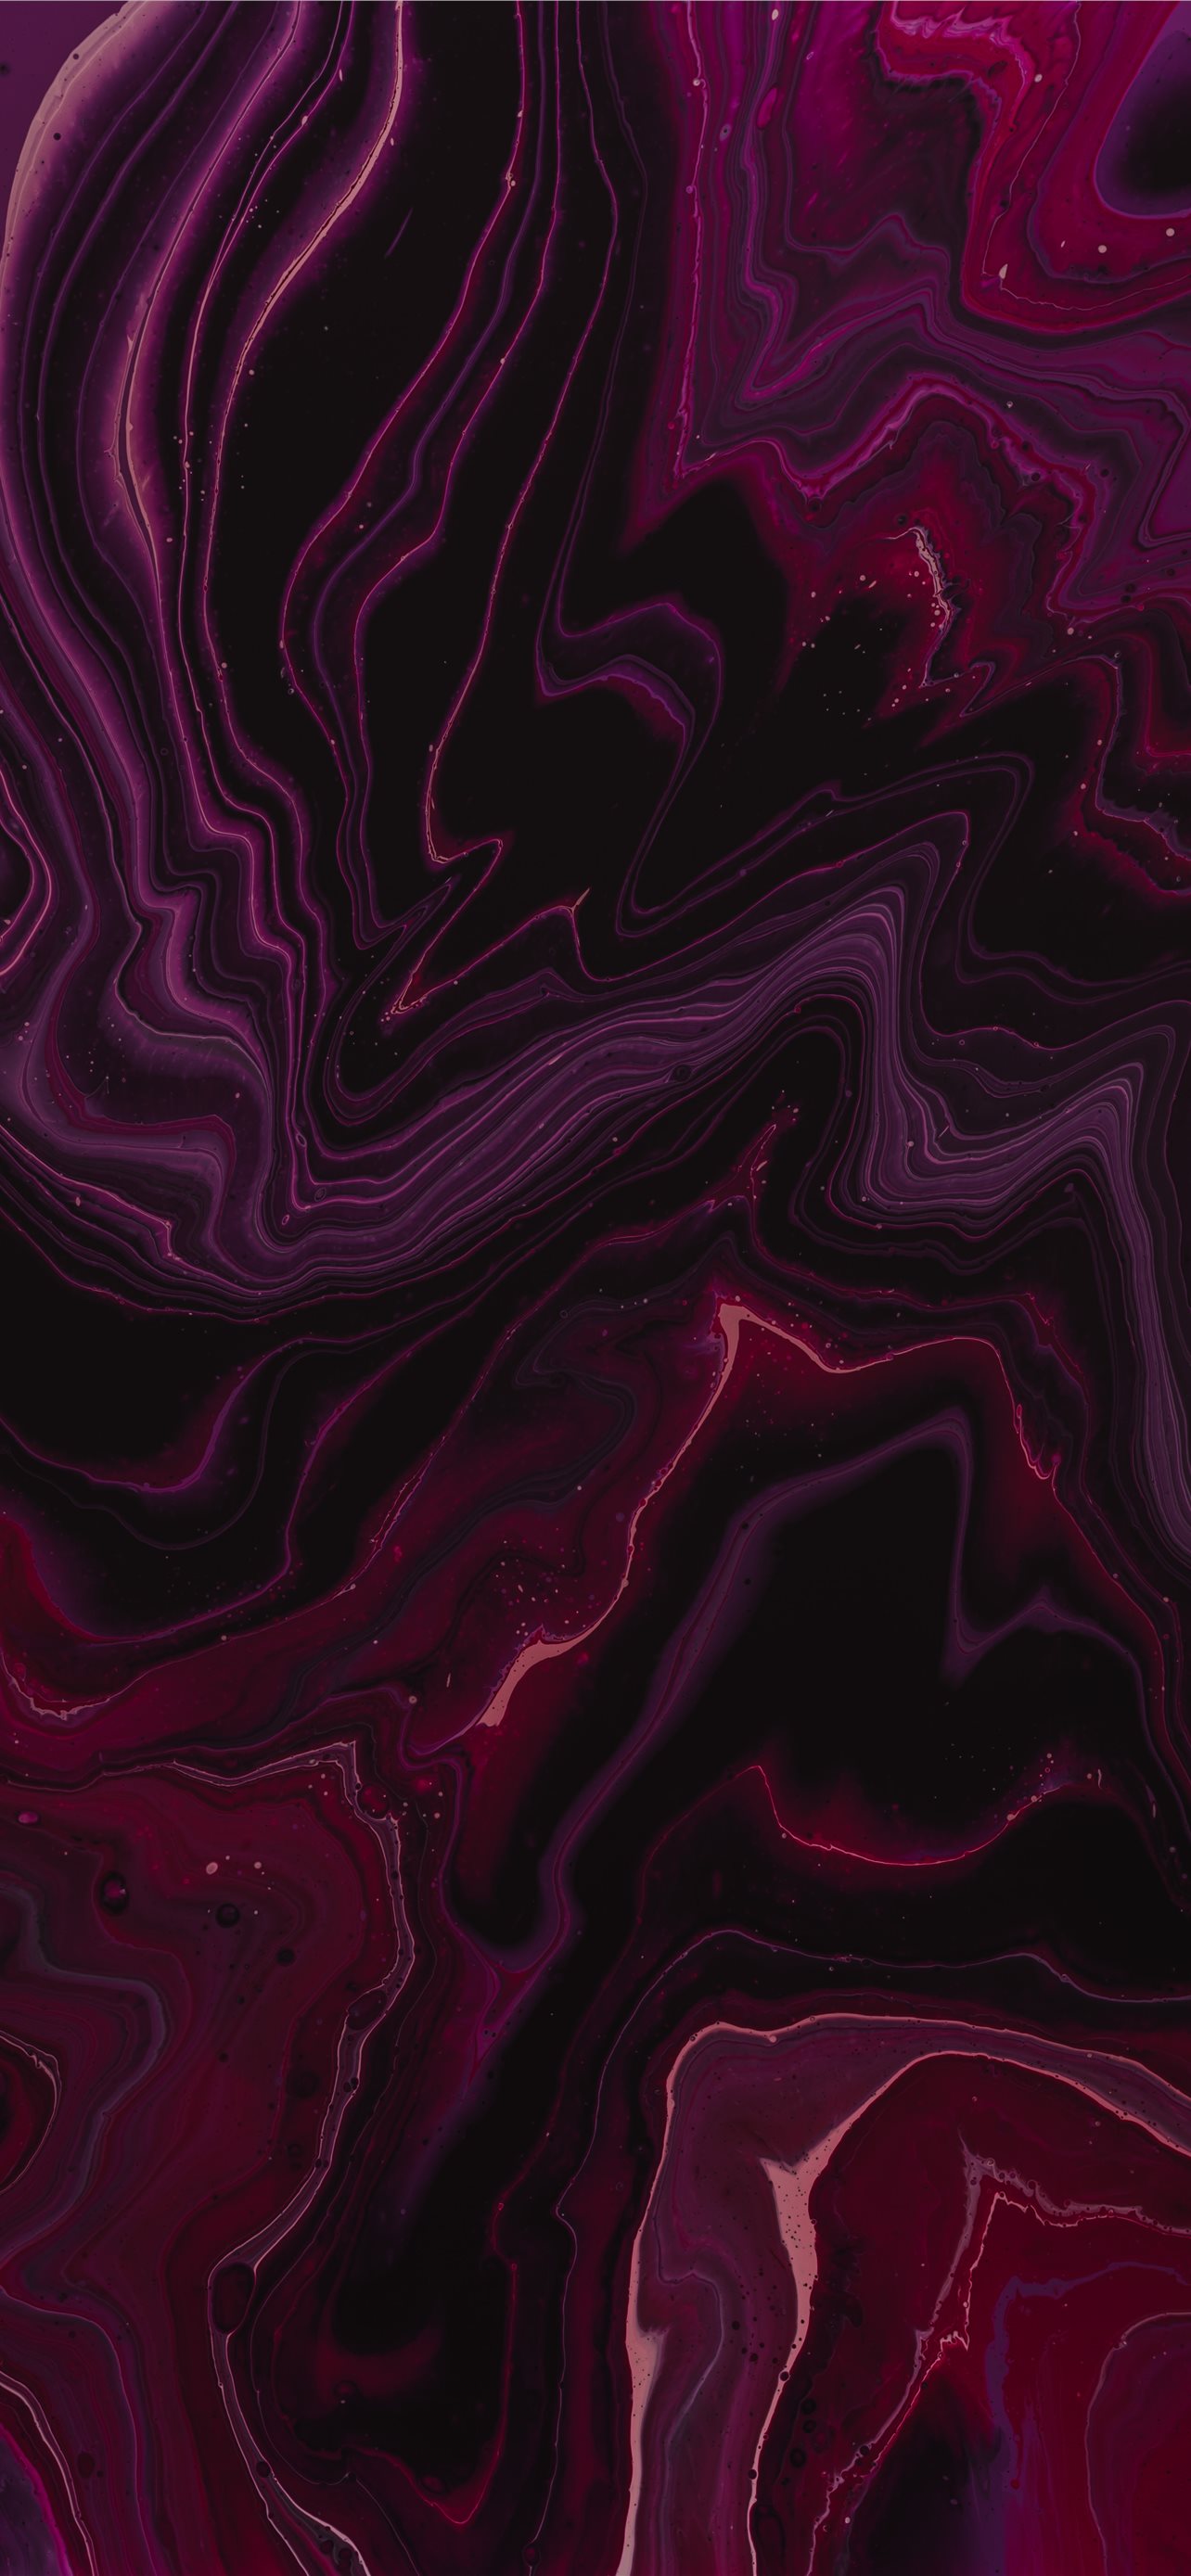 Pink purple and black painting iphone wallpapers free download